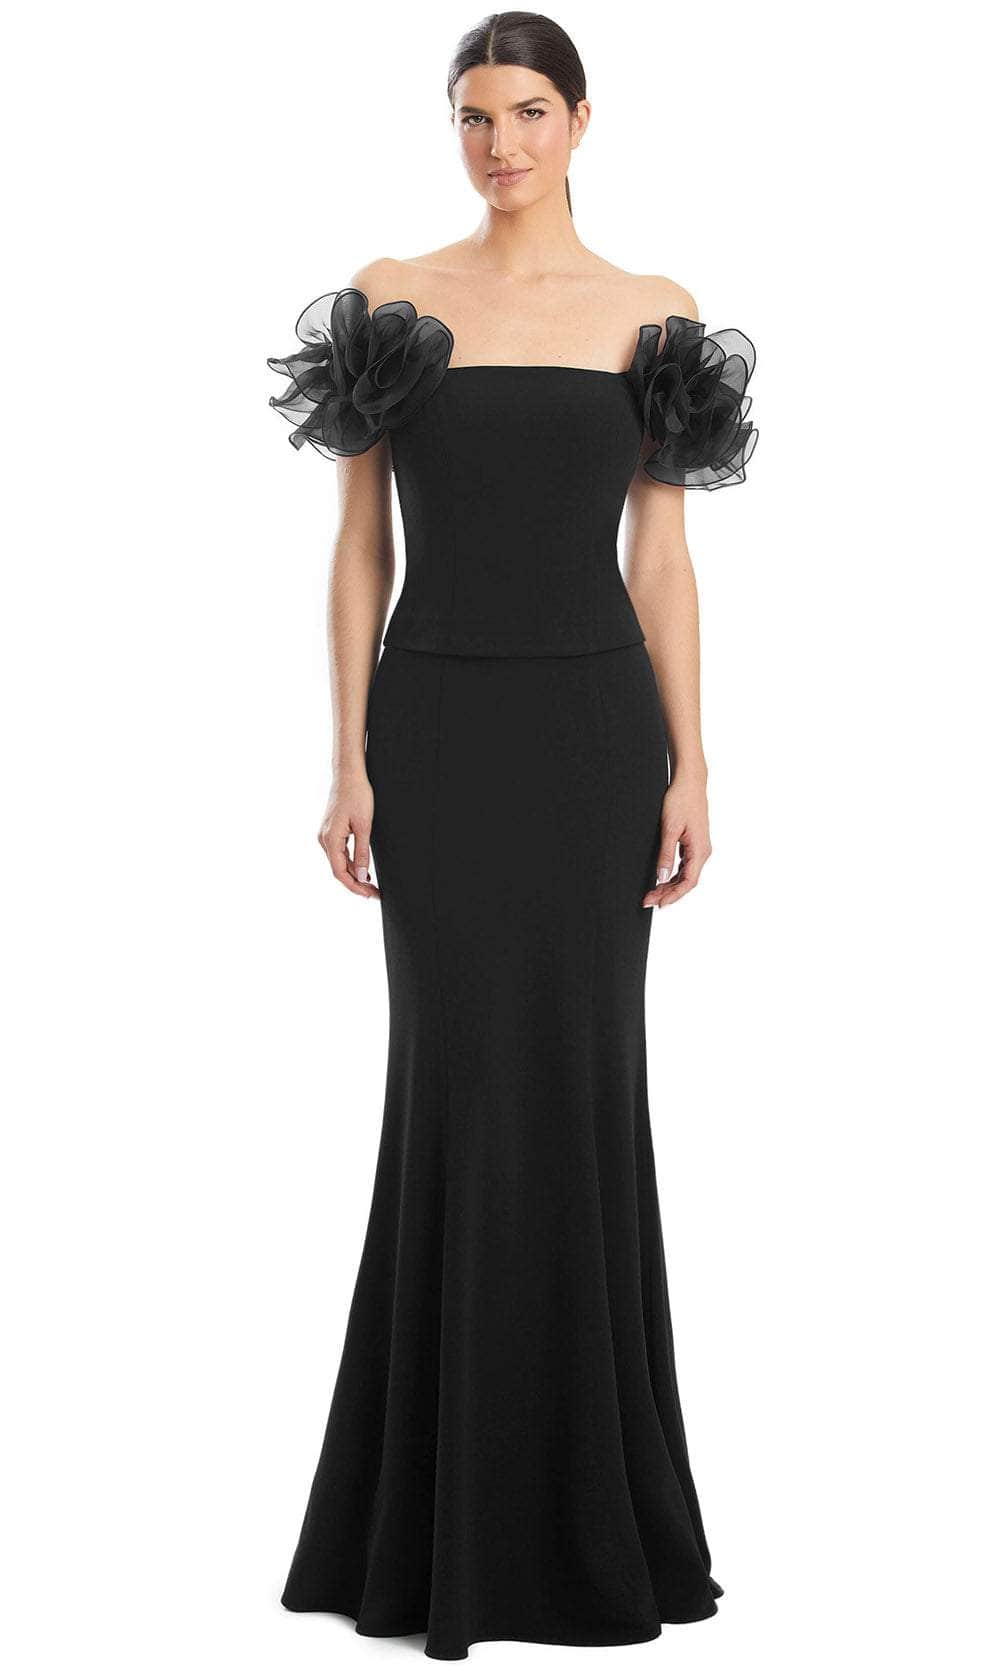 Image of Alexander by Daymor 1983S24 - Ruffled Off-Shoulder Prom Gown